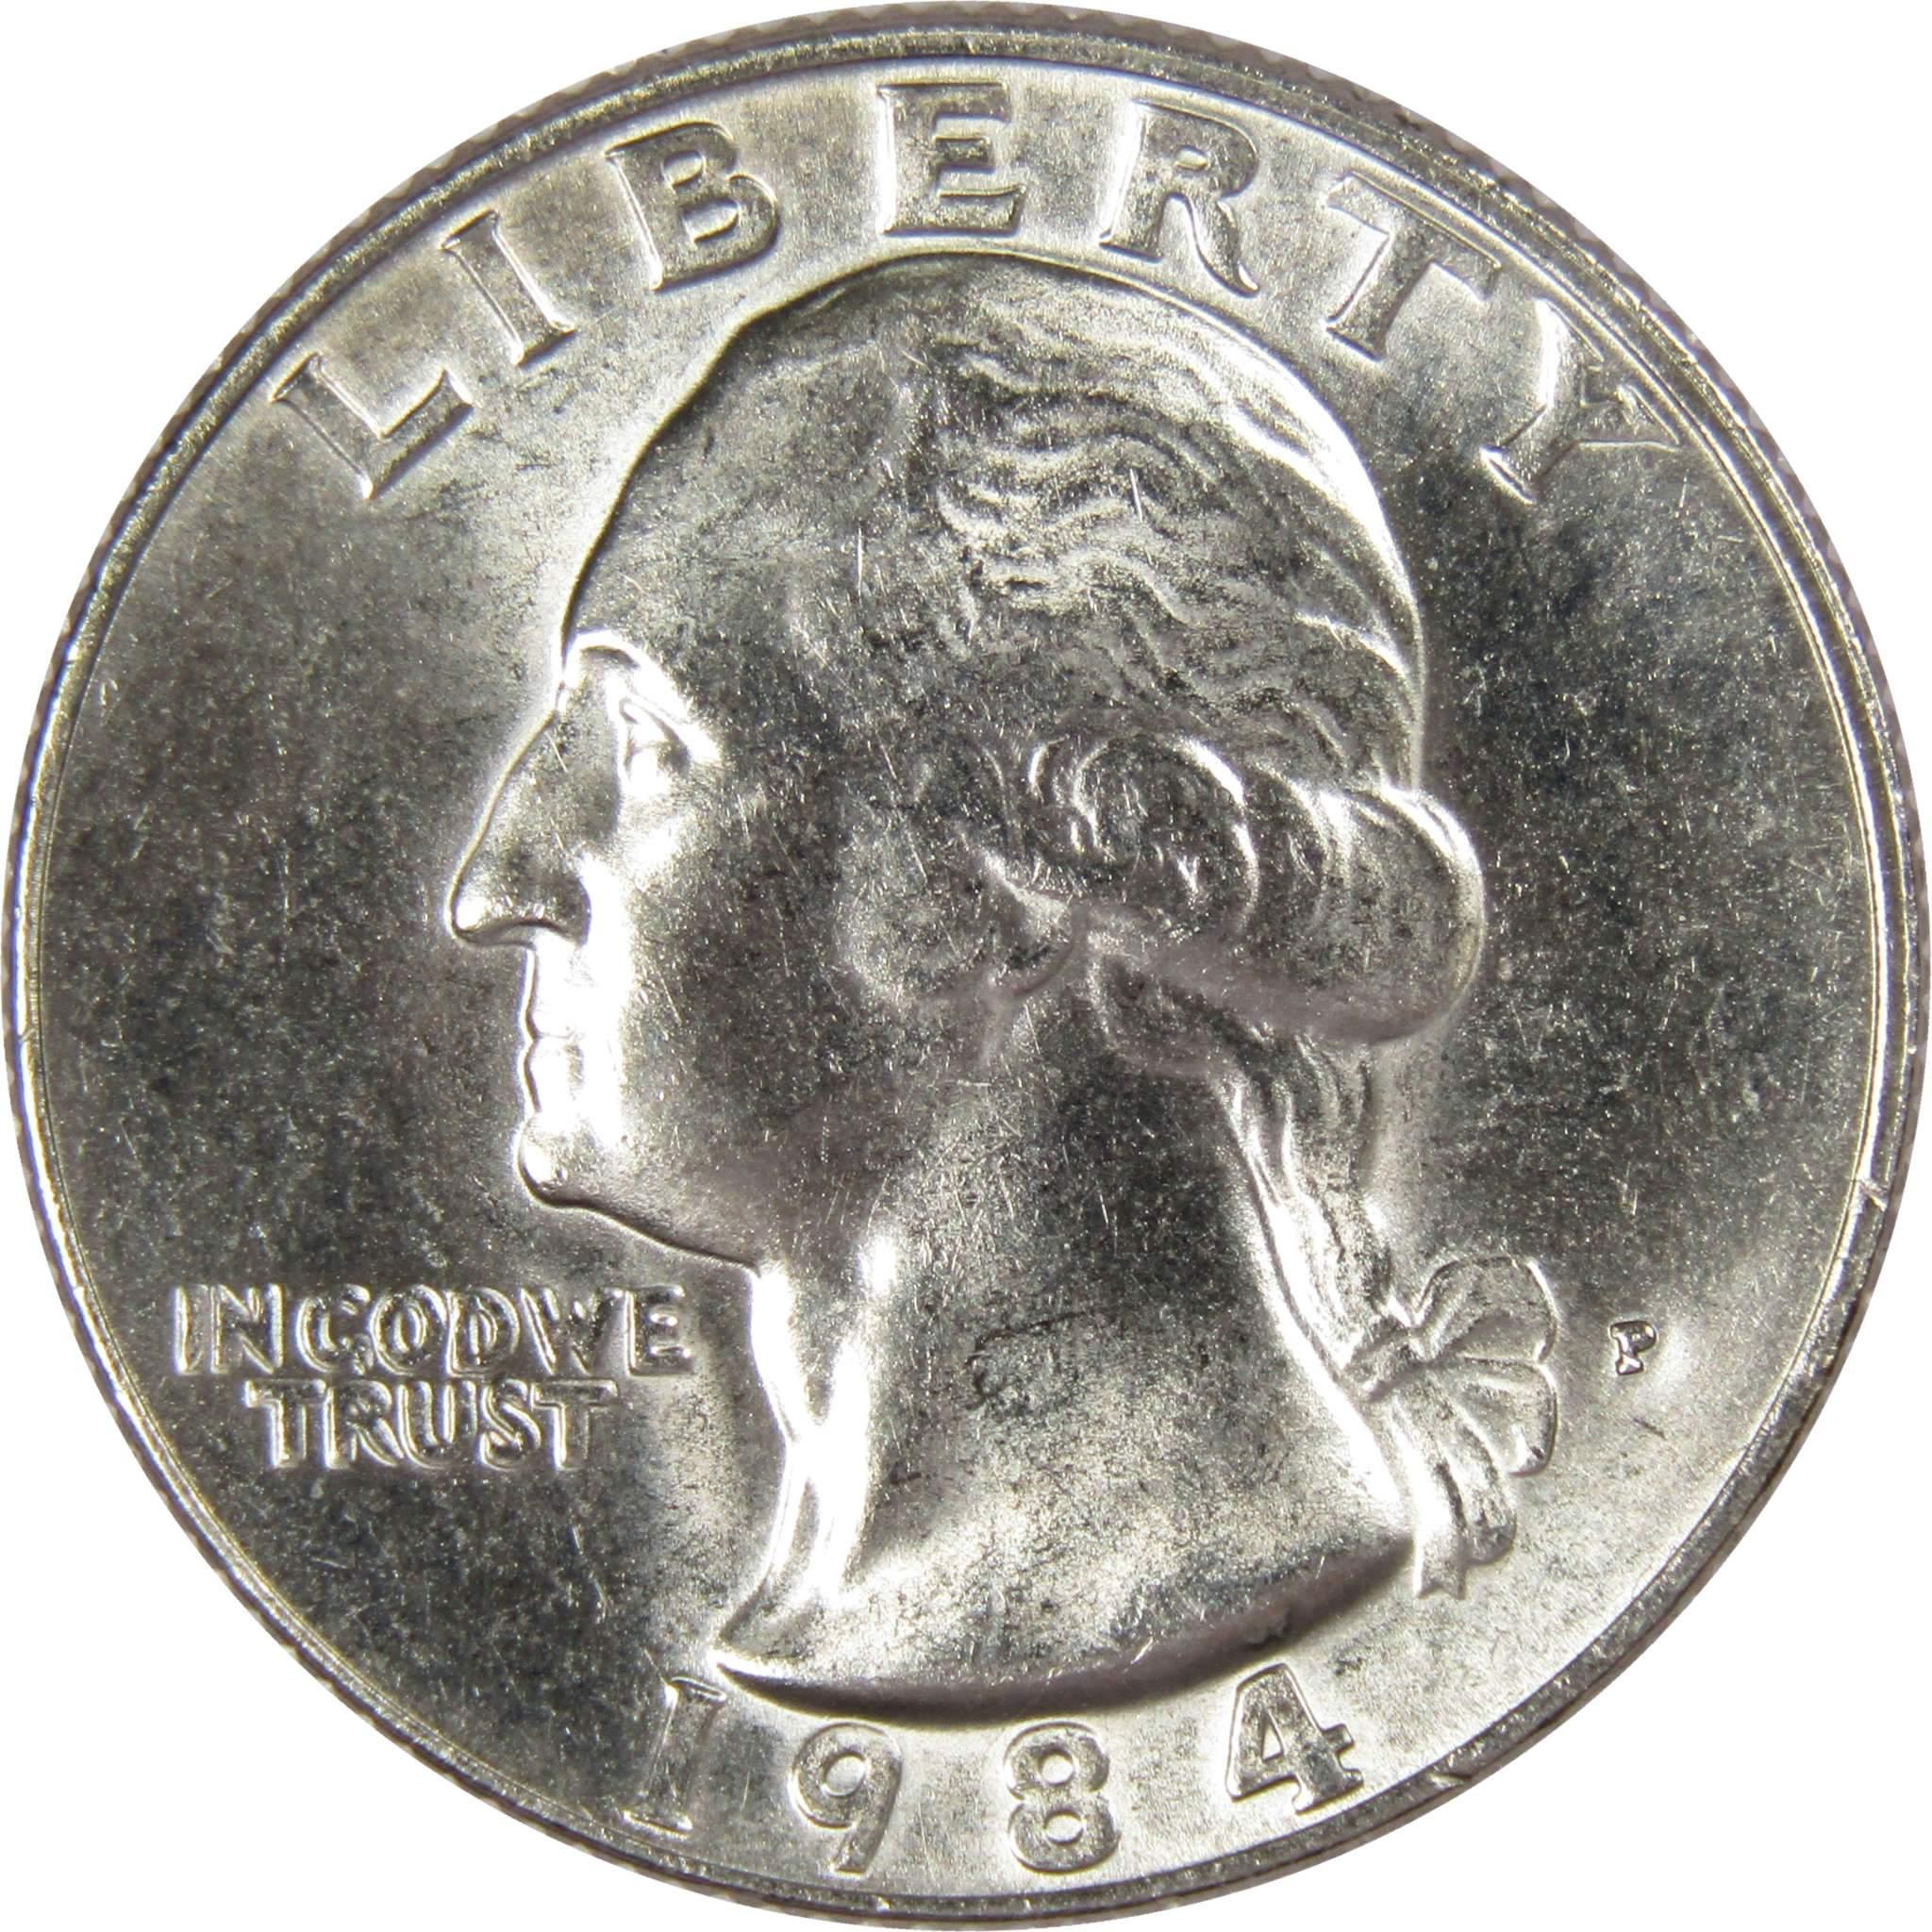 1984 P Washington Quarter BU Uncirculated Mint State 25c US Coin Collectible